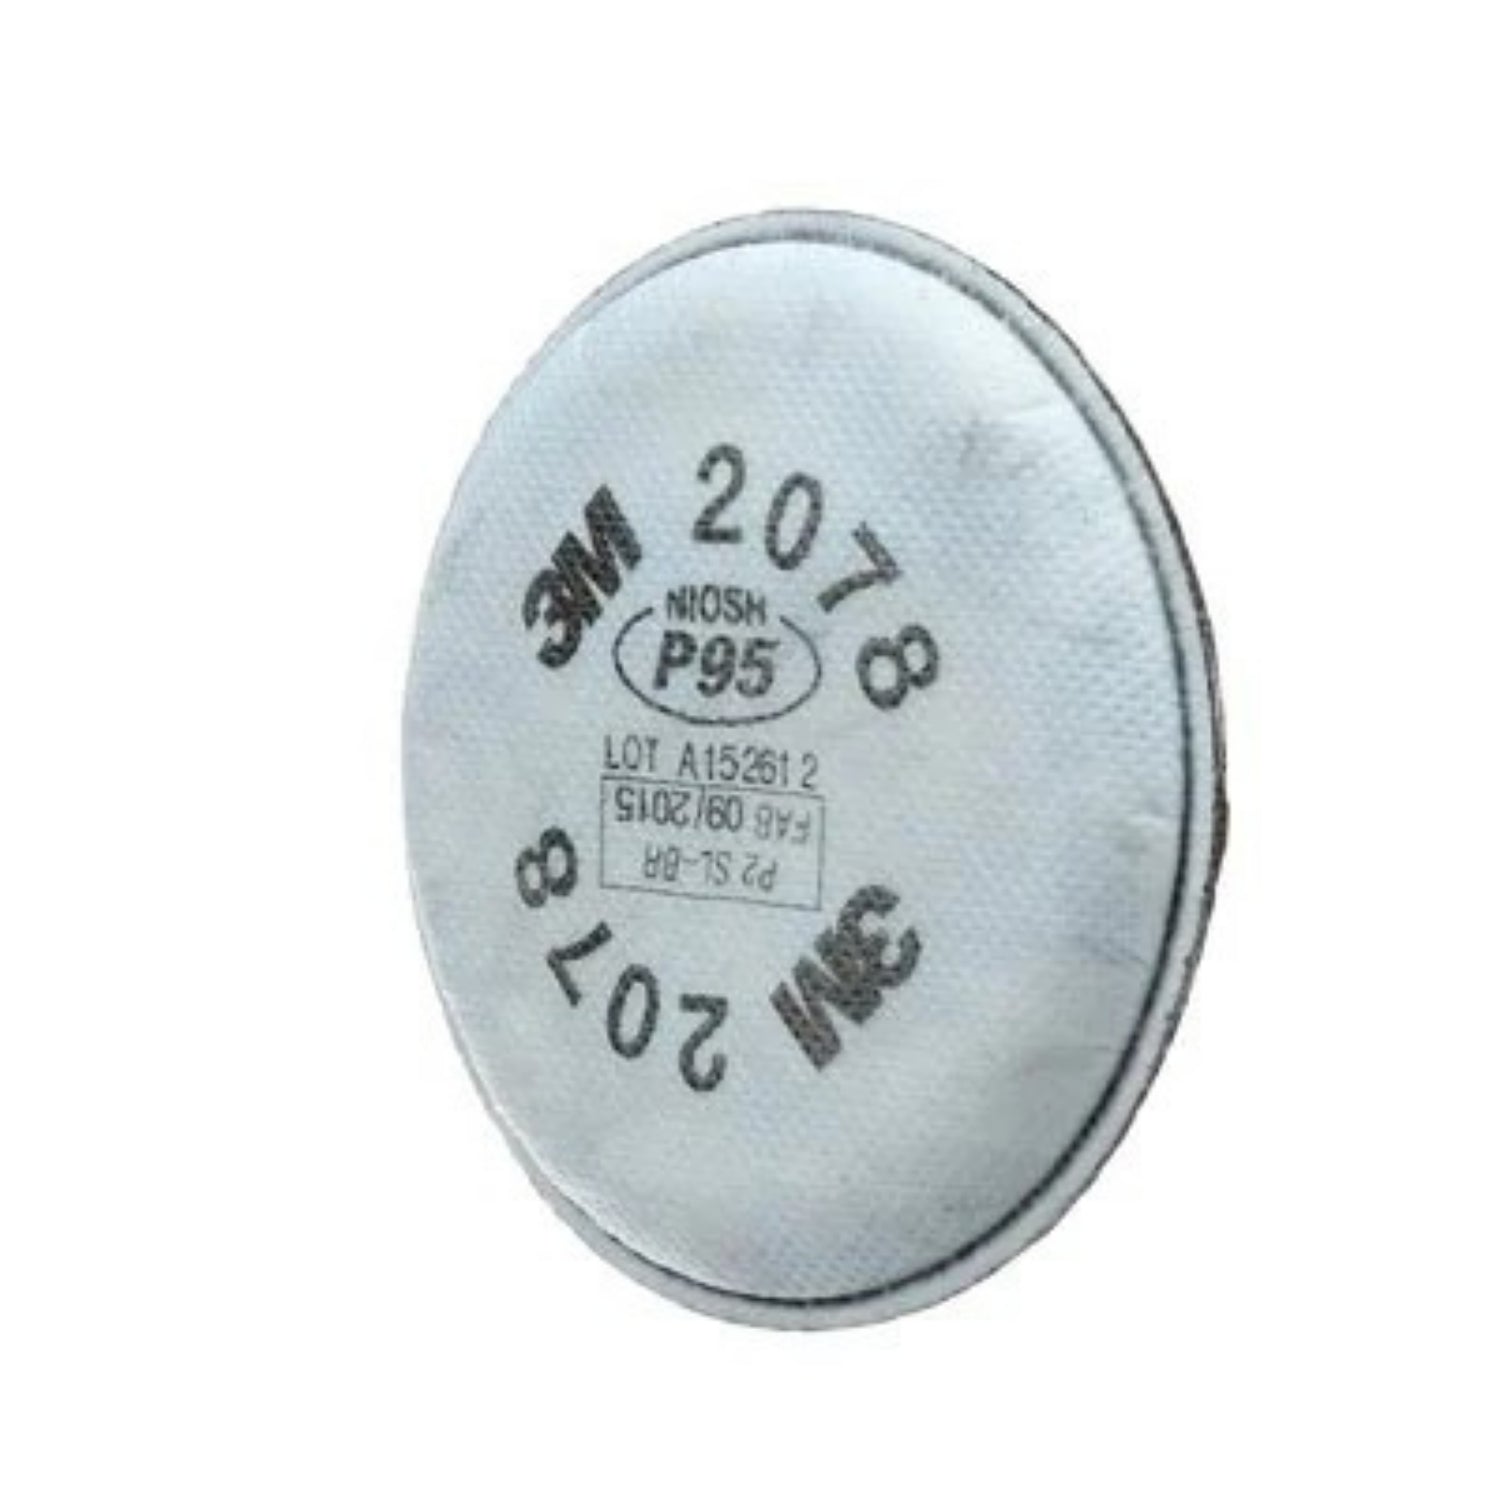 3M™ Particulate Filter 2078, P95, with Nuisance Level Organic Vapor/Acid Gas Relief